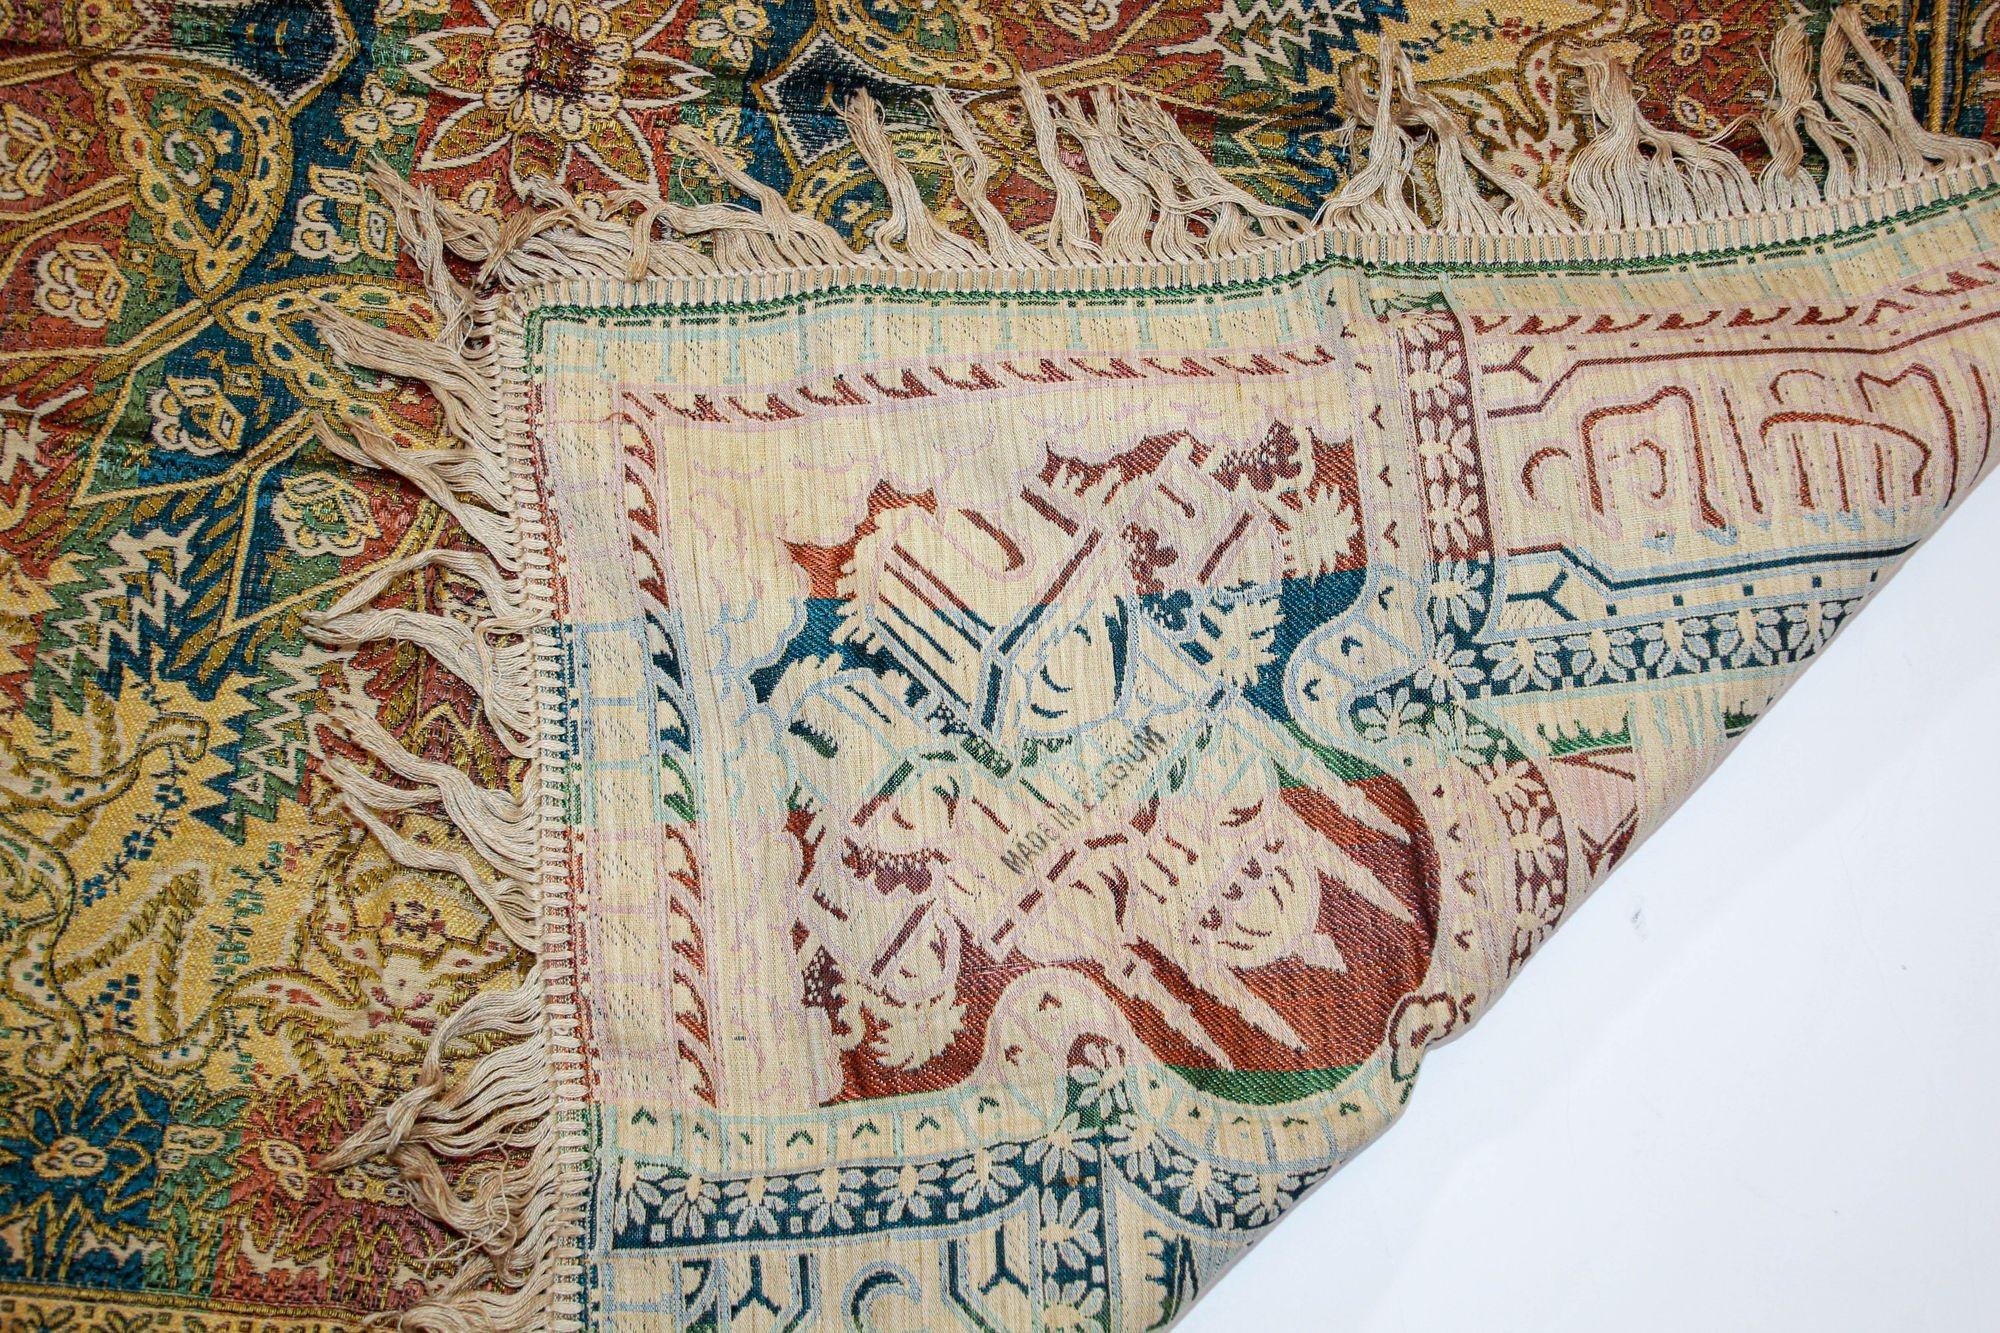 1940s Granada Islamic Spain Textile with Arabic Calligraphy Writing For Sale 1